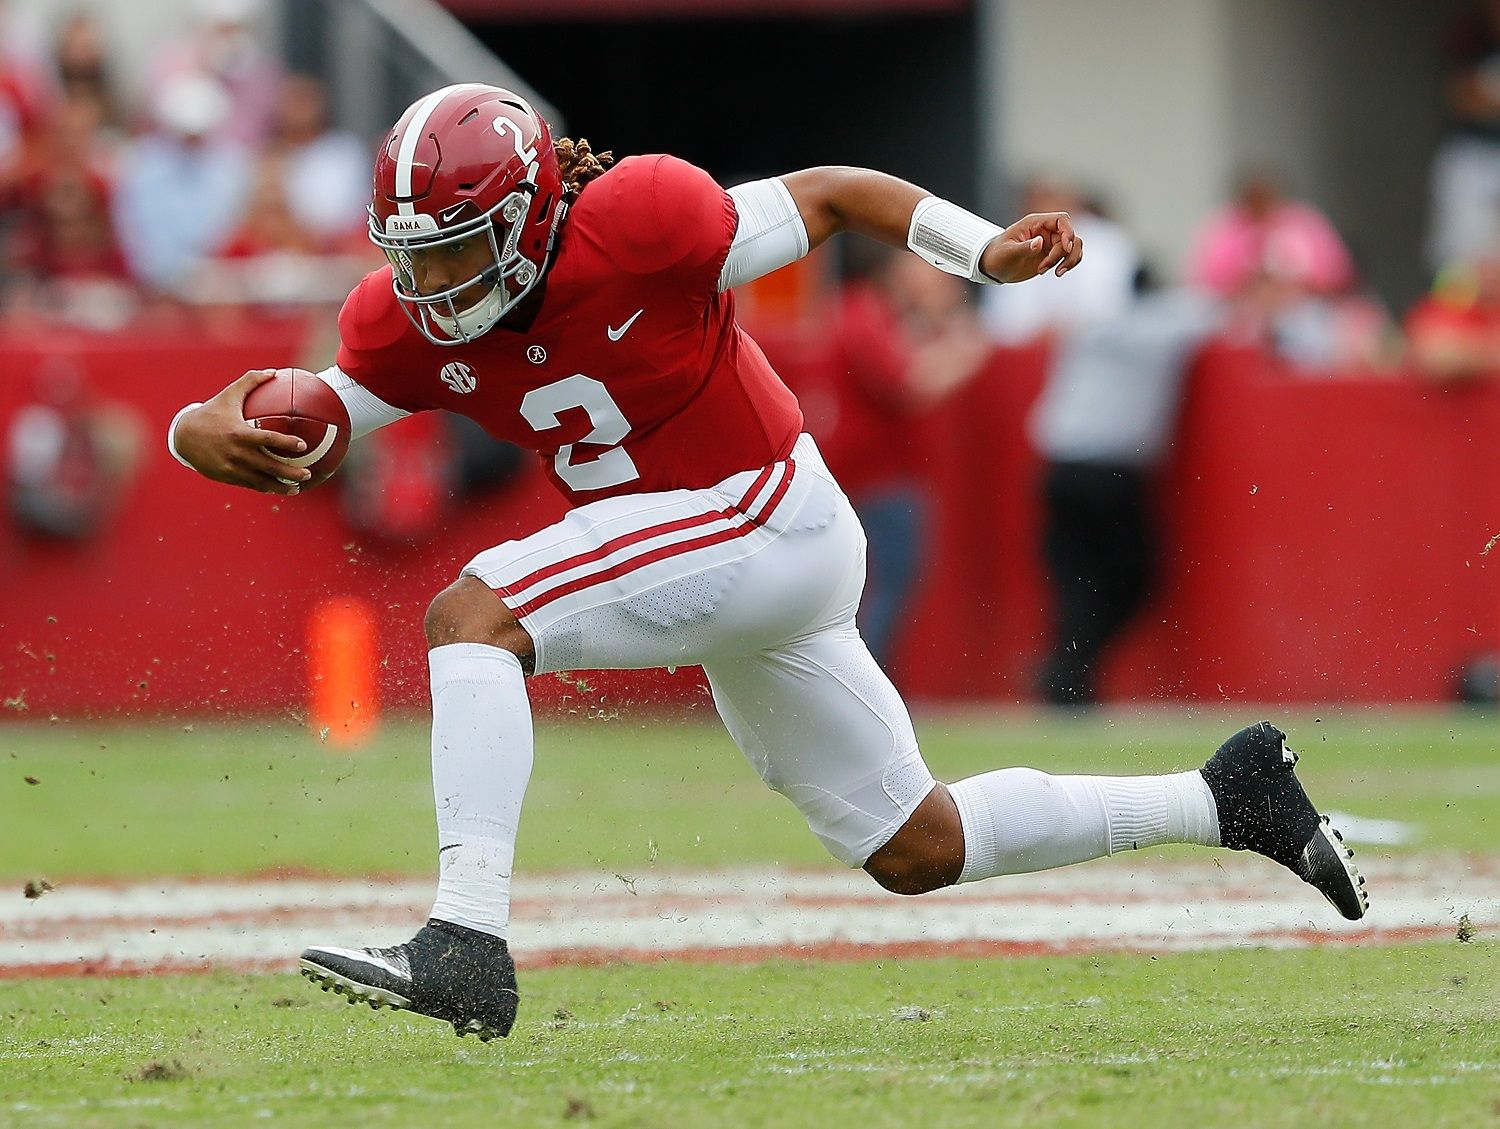 TUSCALOOSA, AL - OCTOBER 21:  Jalen Hurts #2 of the Alabama Crimson Tide rushes against the Tennessee Volunteers at Bryant-Denny Stadium on October 21, 2017 in Tuscaloosa, Alabama.  (Photo by Kevin C. Cox/Getty Images)